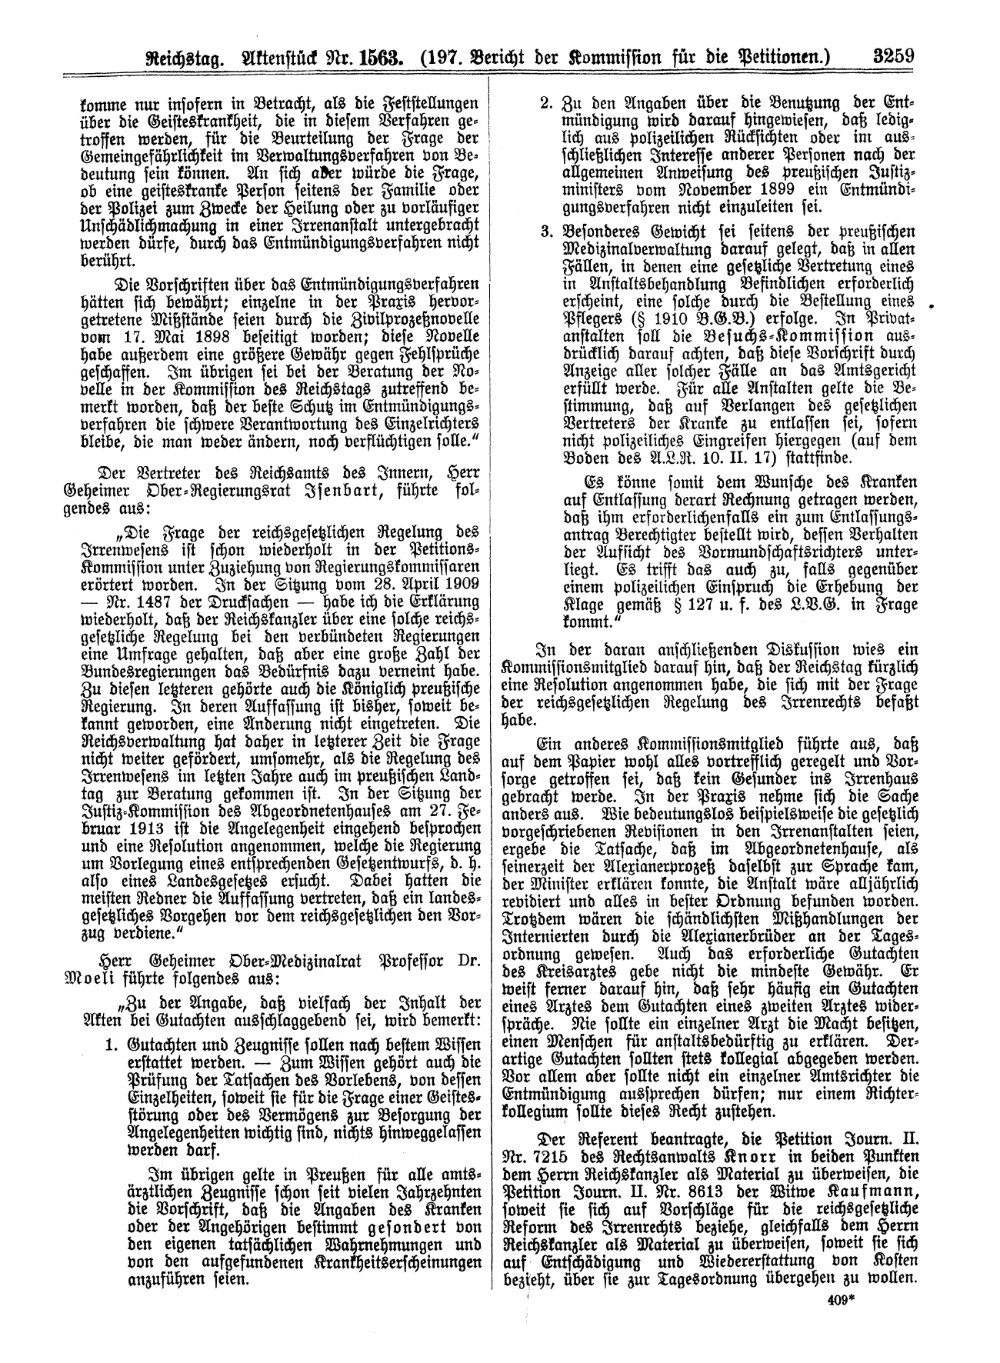 Scan of page 3259